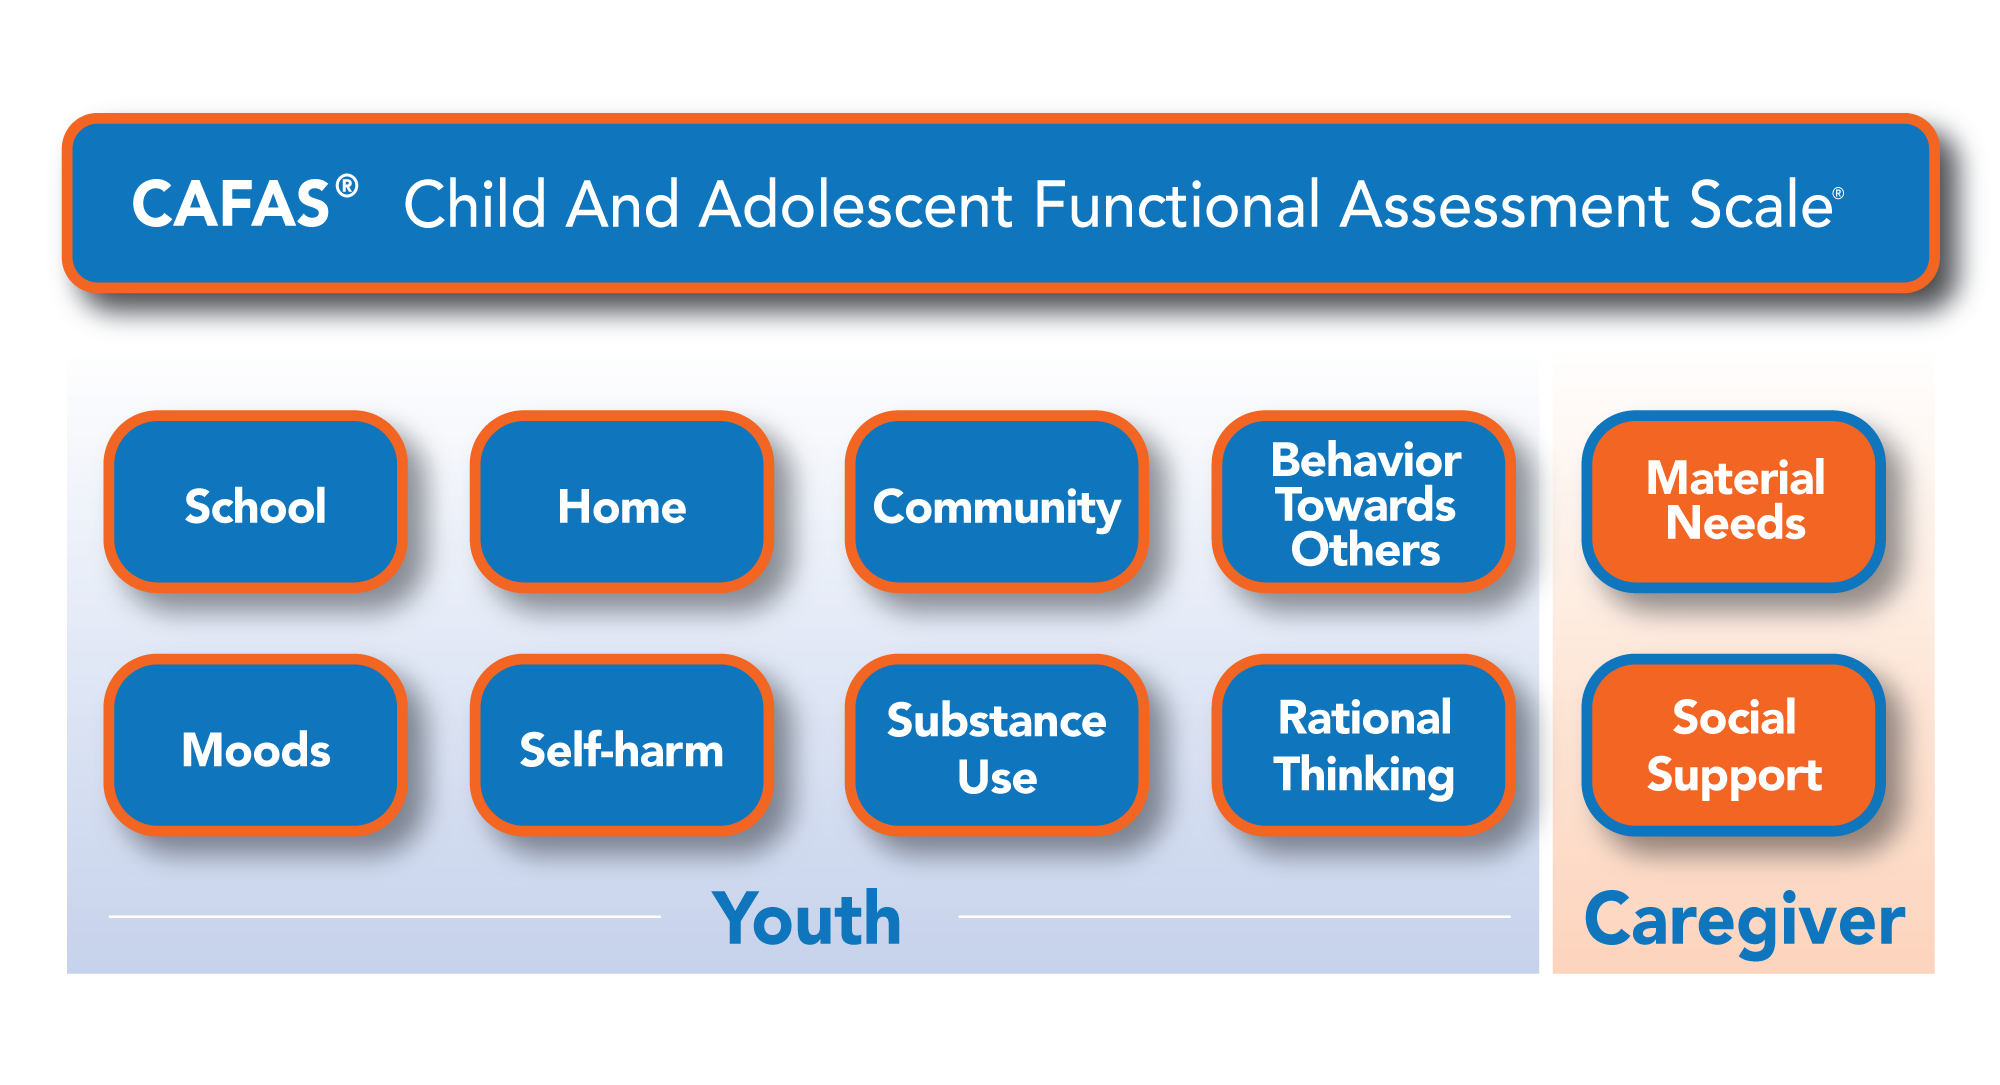 A chart of the eight subscales for rating a child using the CAFAS or PECFAS. The chart also includes the two optional scales for rating a child's caregivers on their ability to provide for the youth’s material and emotional needs, listed as Material Needs and Social Support.